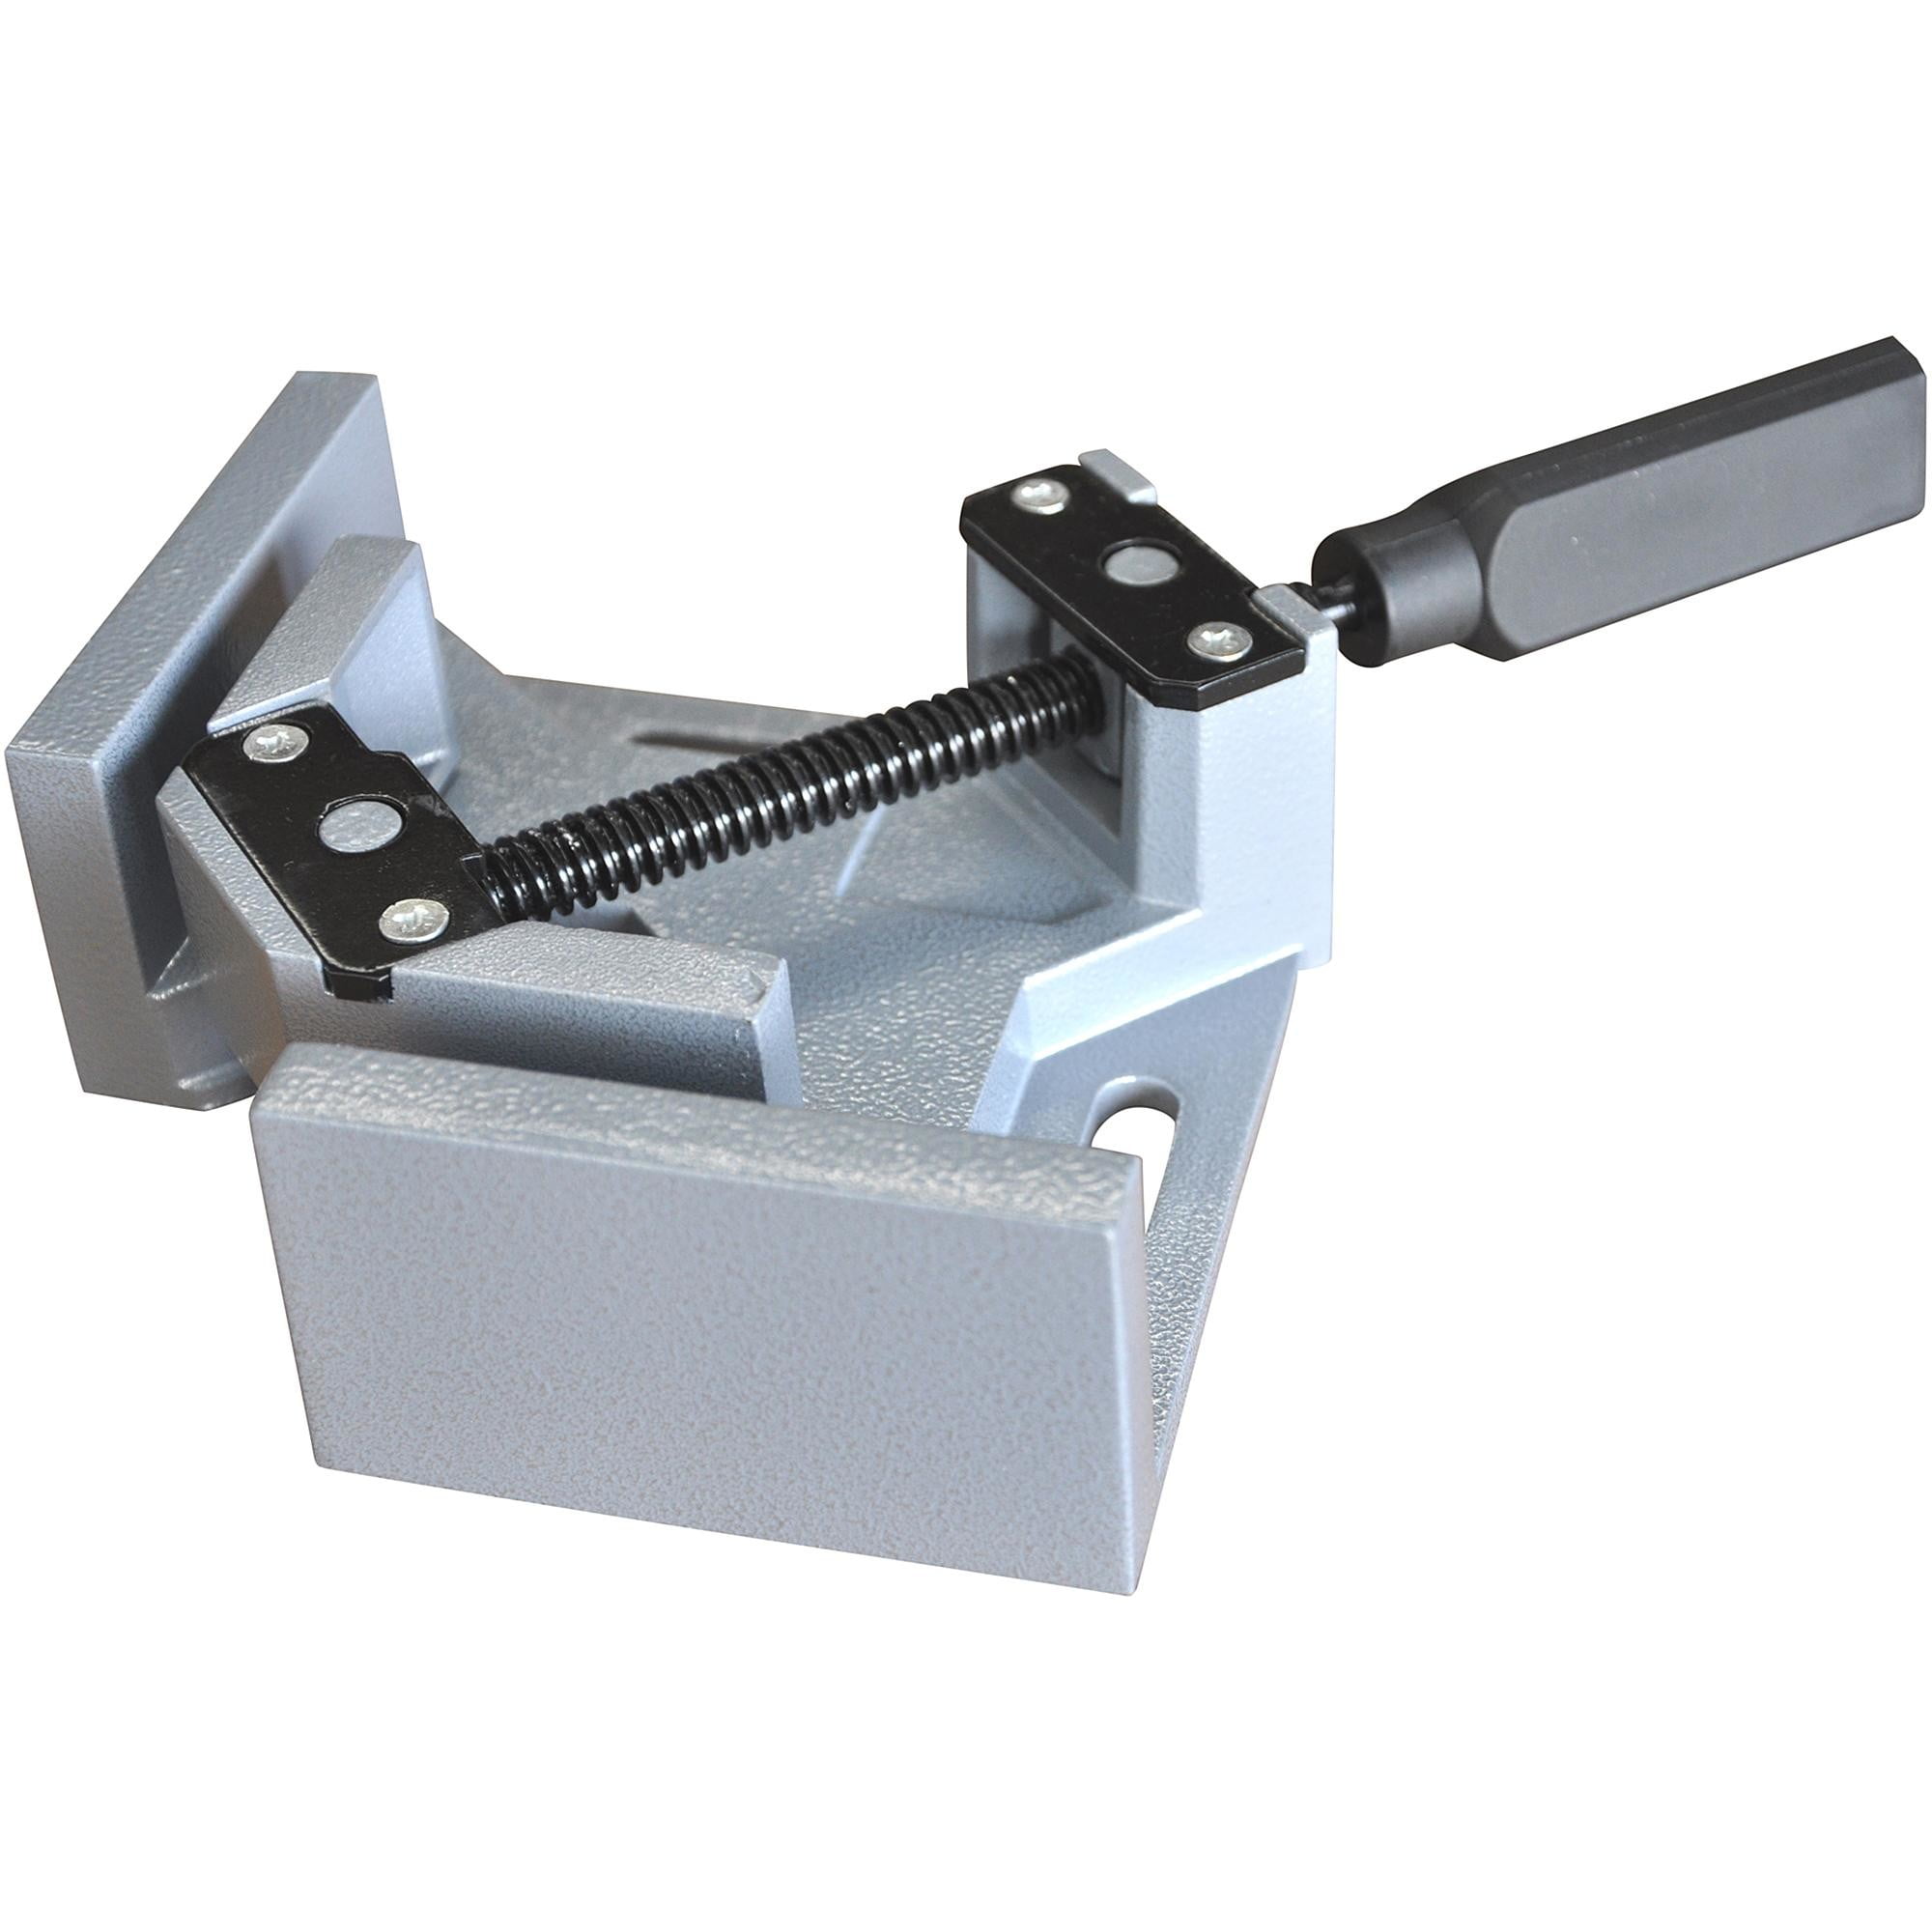 90° Right Angle Corner clamp Corner vice metal welding woodworking jaw rotation 